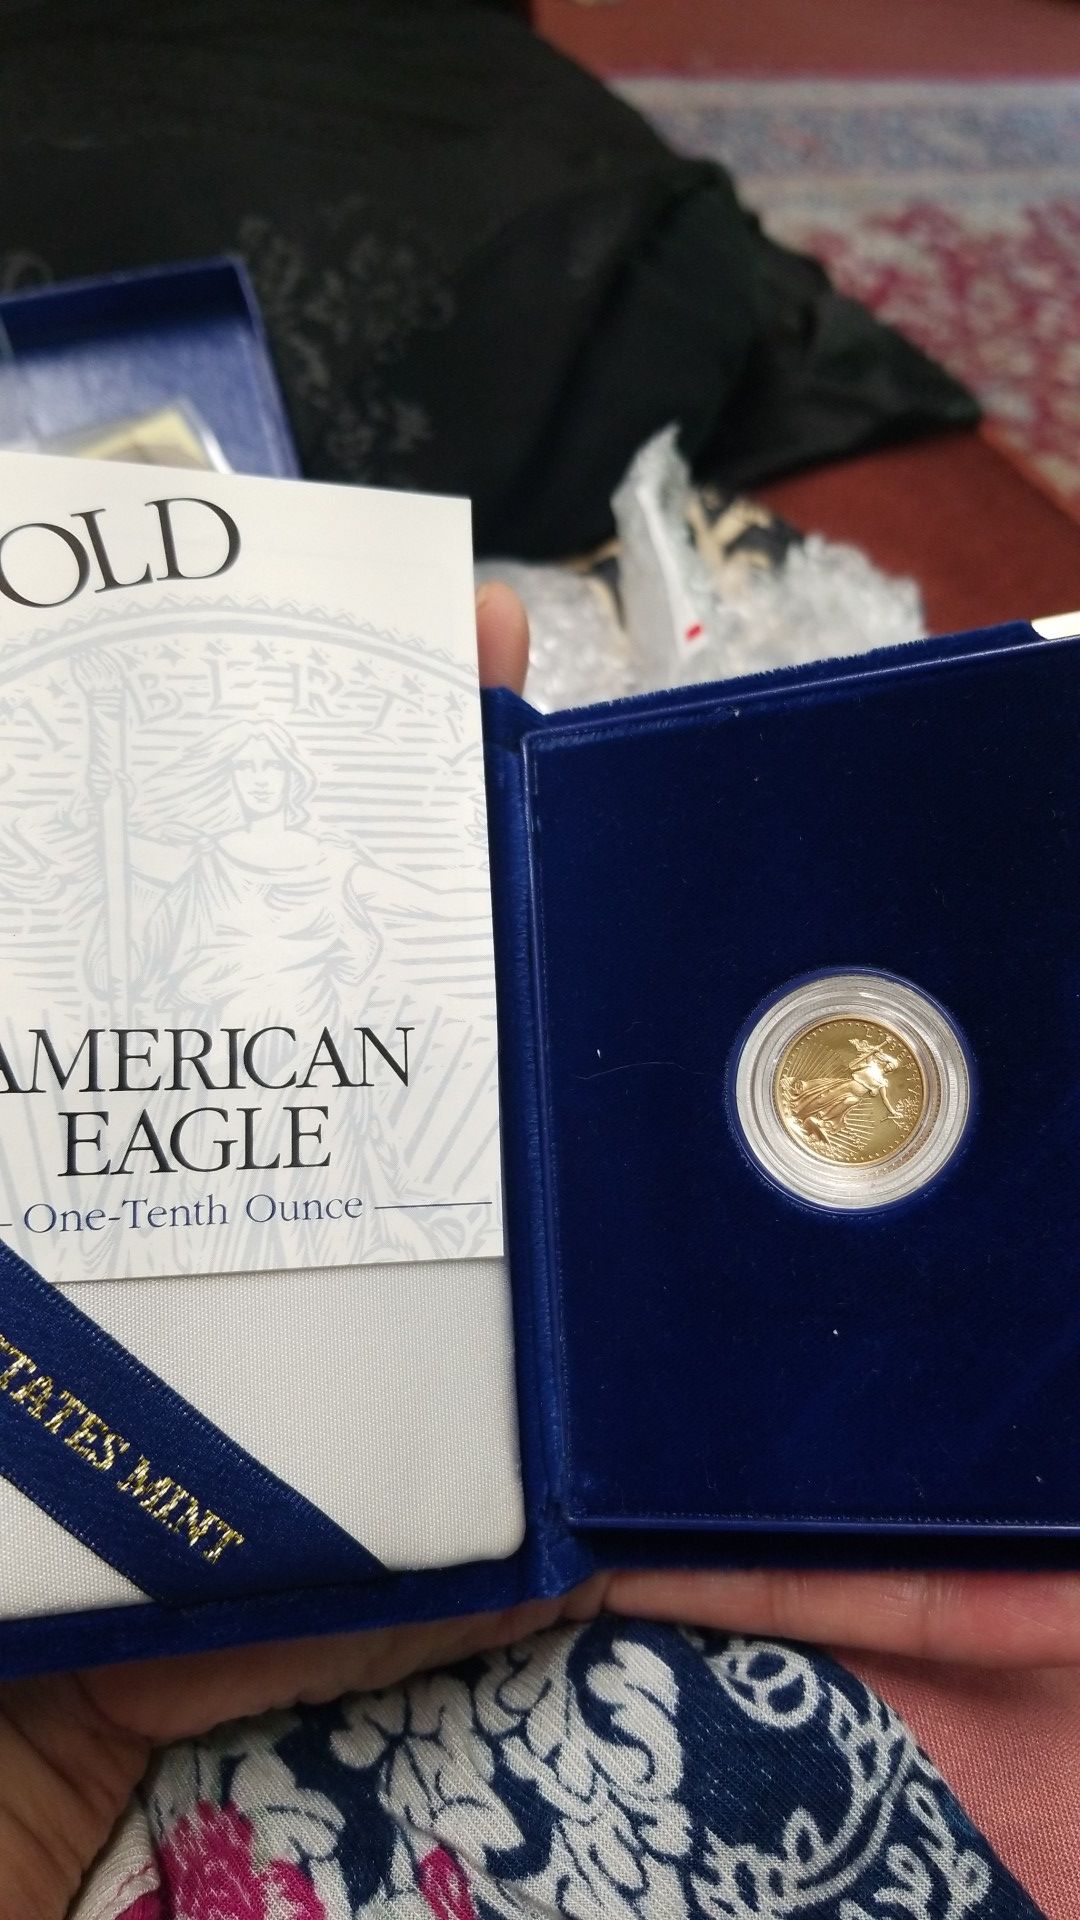 1994 AMERICAN EAGLE GOLD PROOF COIN US MINT BOX WITH PAPER WORK